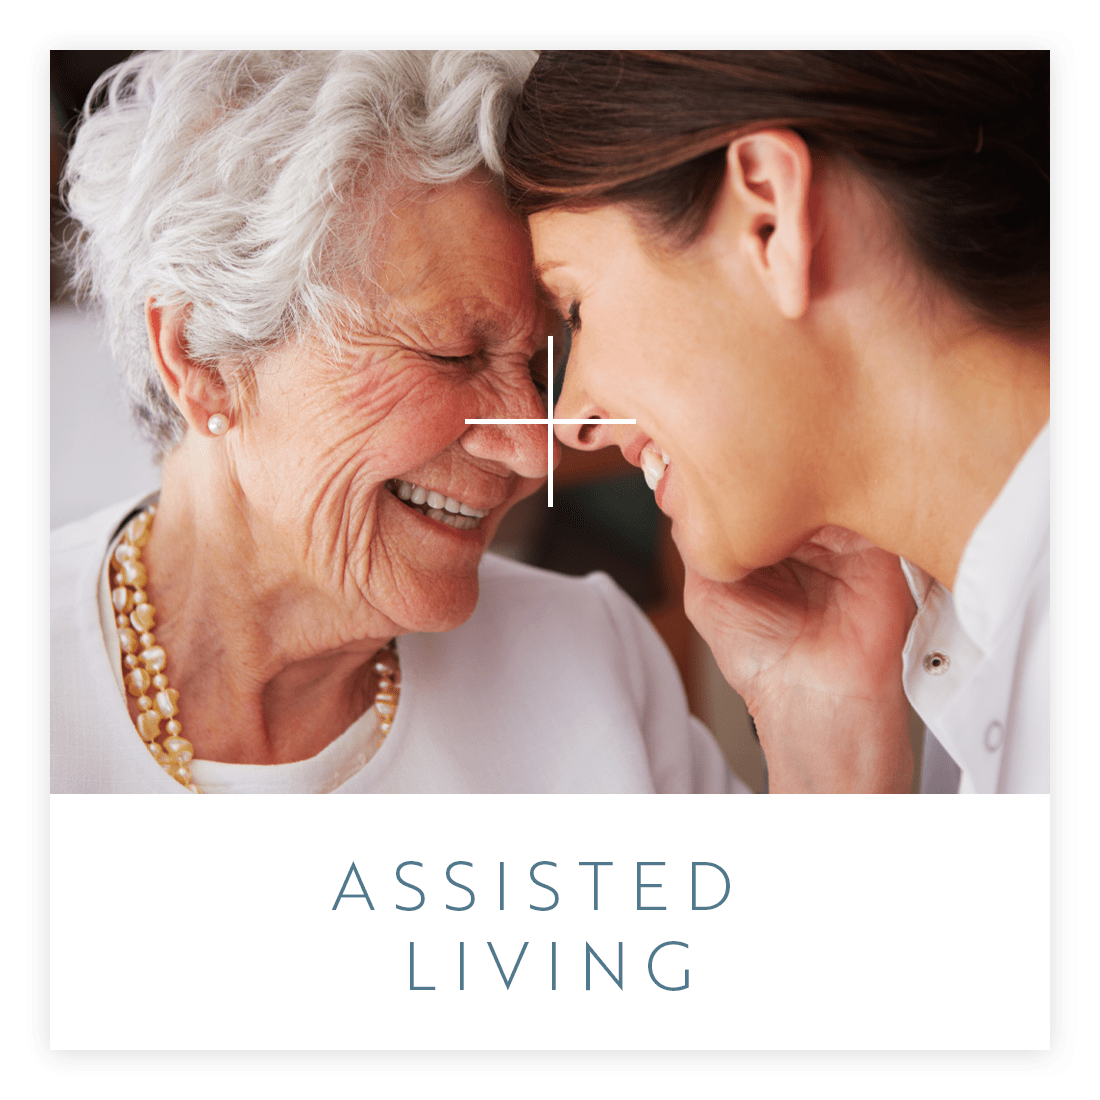 View our Assisted Living services at Claremont Place in Claremont, California